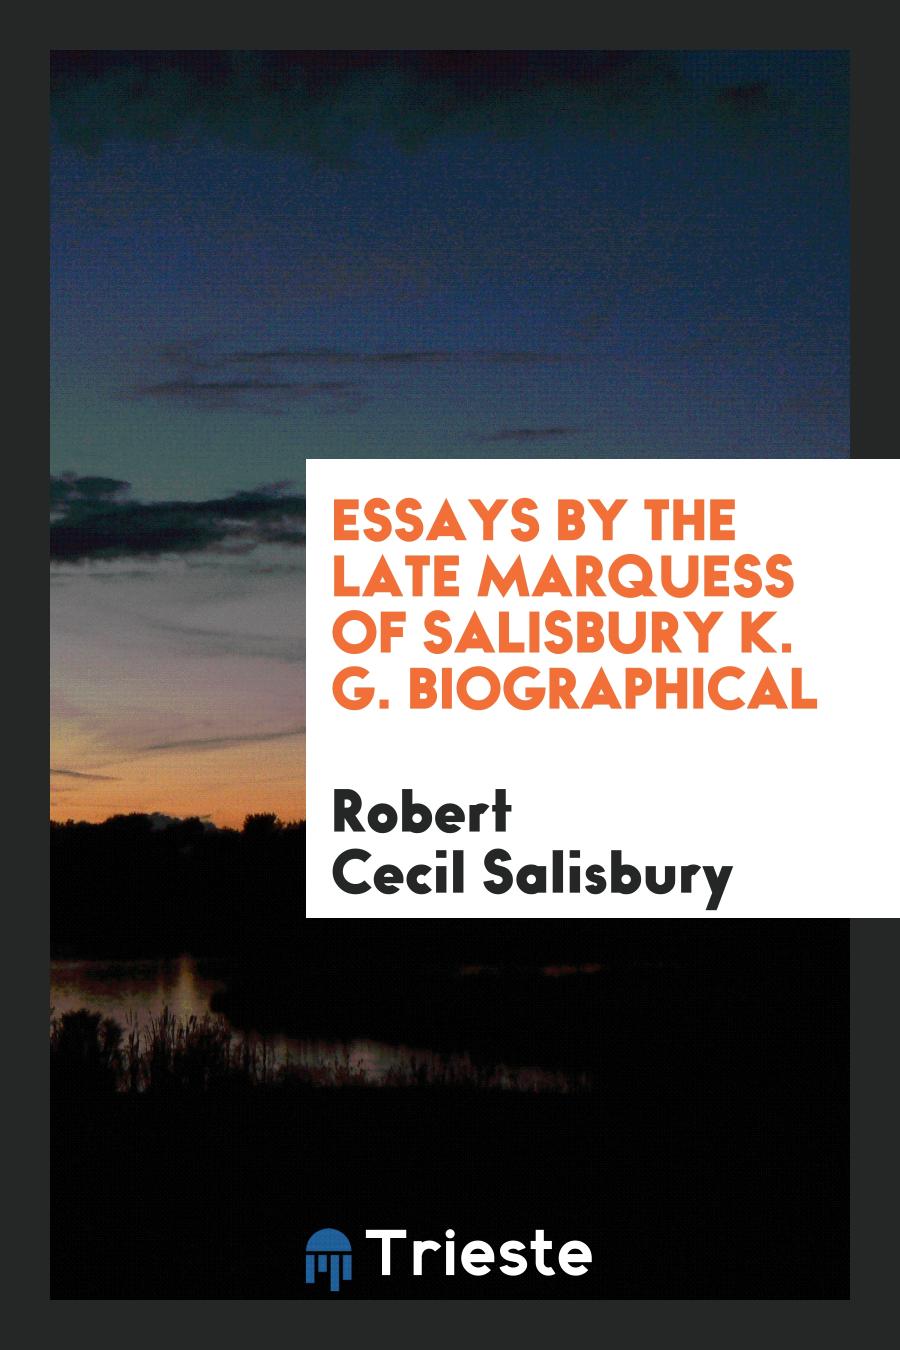 Robert Cecil Salisbury - Essays by the Late Marquess of Salisbury K. G. Biographical